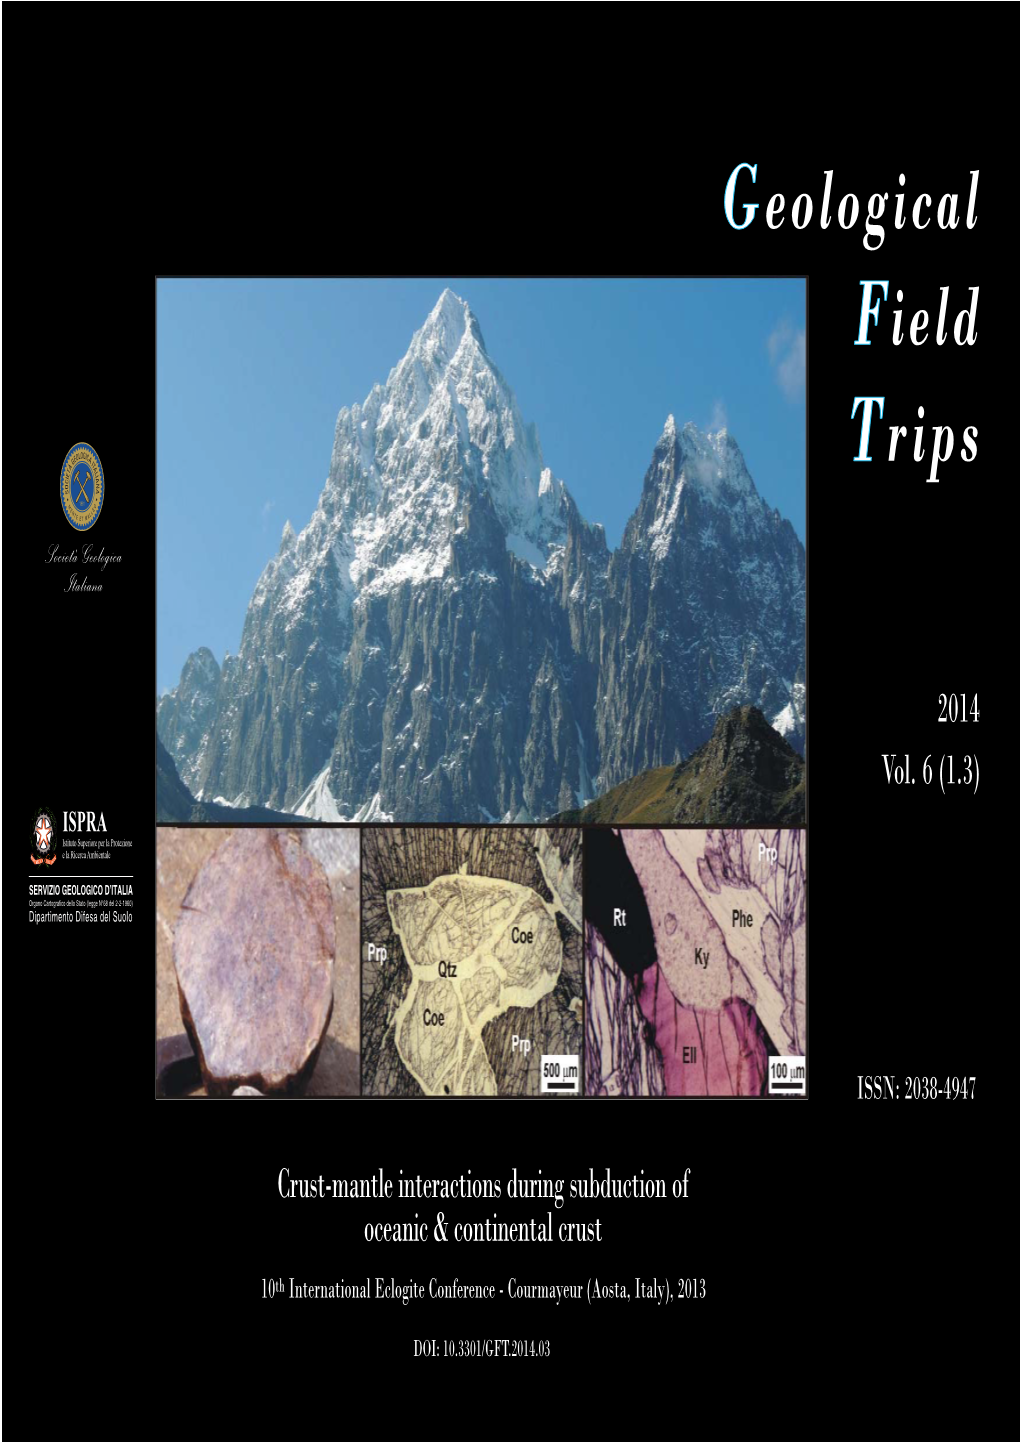 Crust-Mantle Interactions During Subduction of Oceanic & Continental Crust 10Th International Eclogite Conference - Courmayeur (Aosta, Italy), 2013